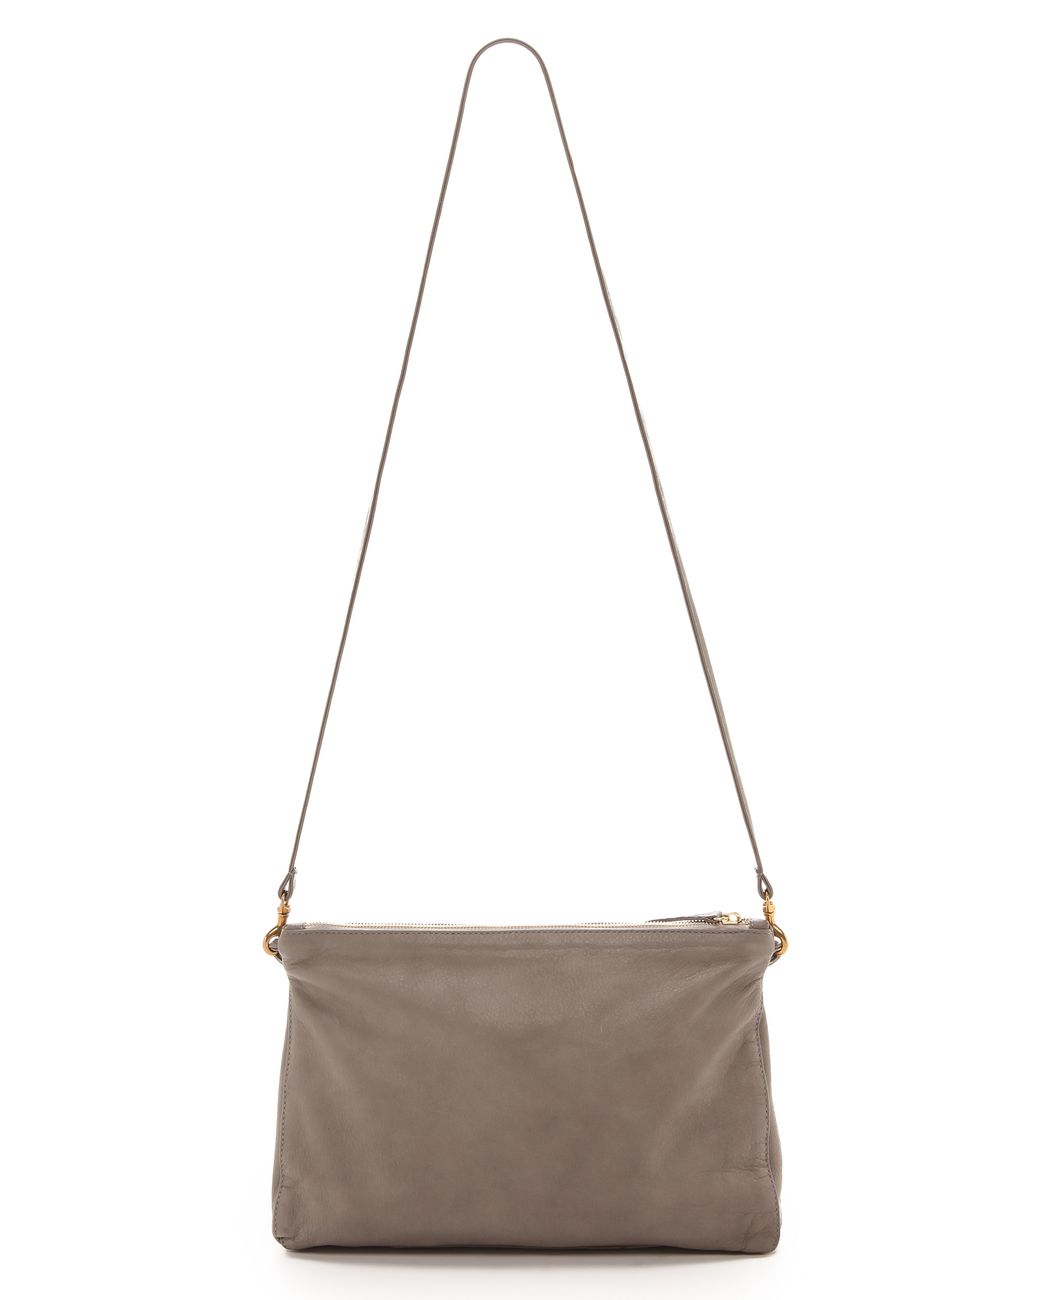 Clare V. Gosee Leather and Suede Shoulder Bag in Brown